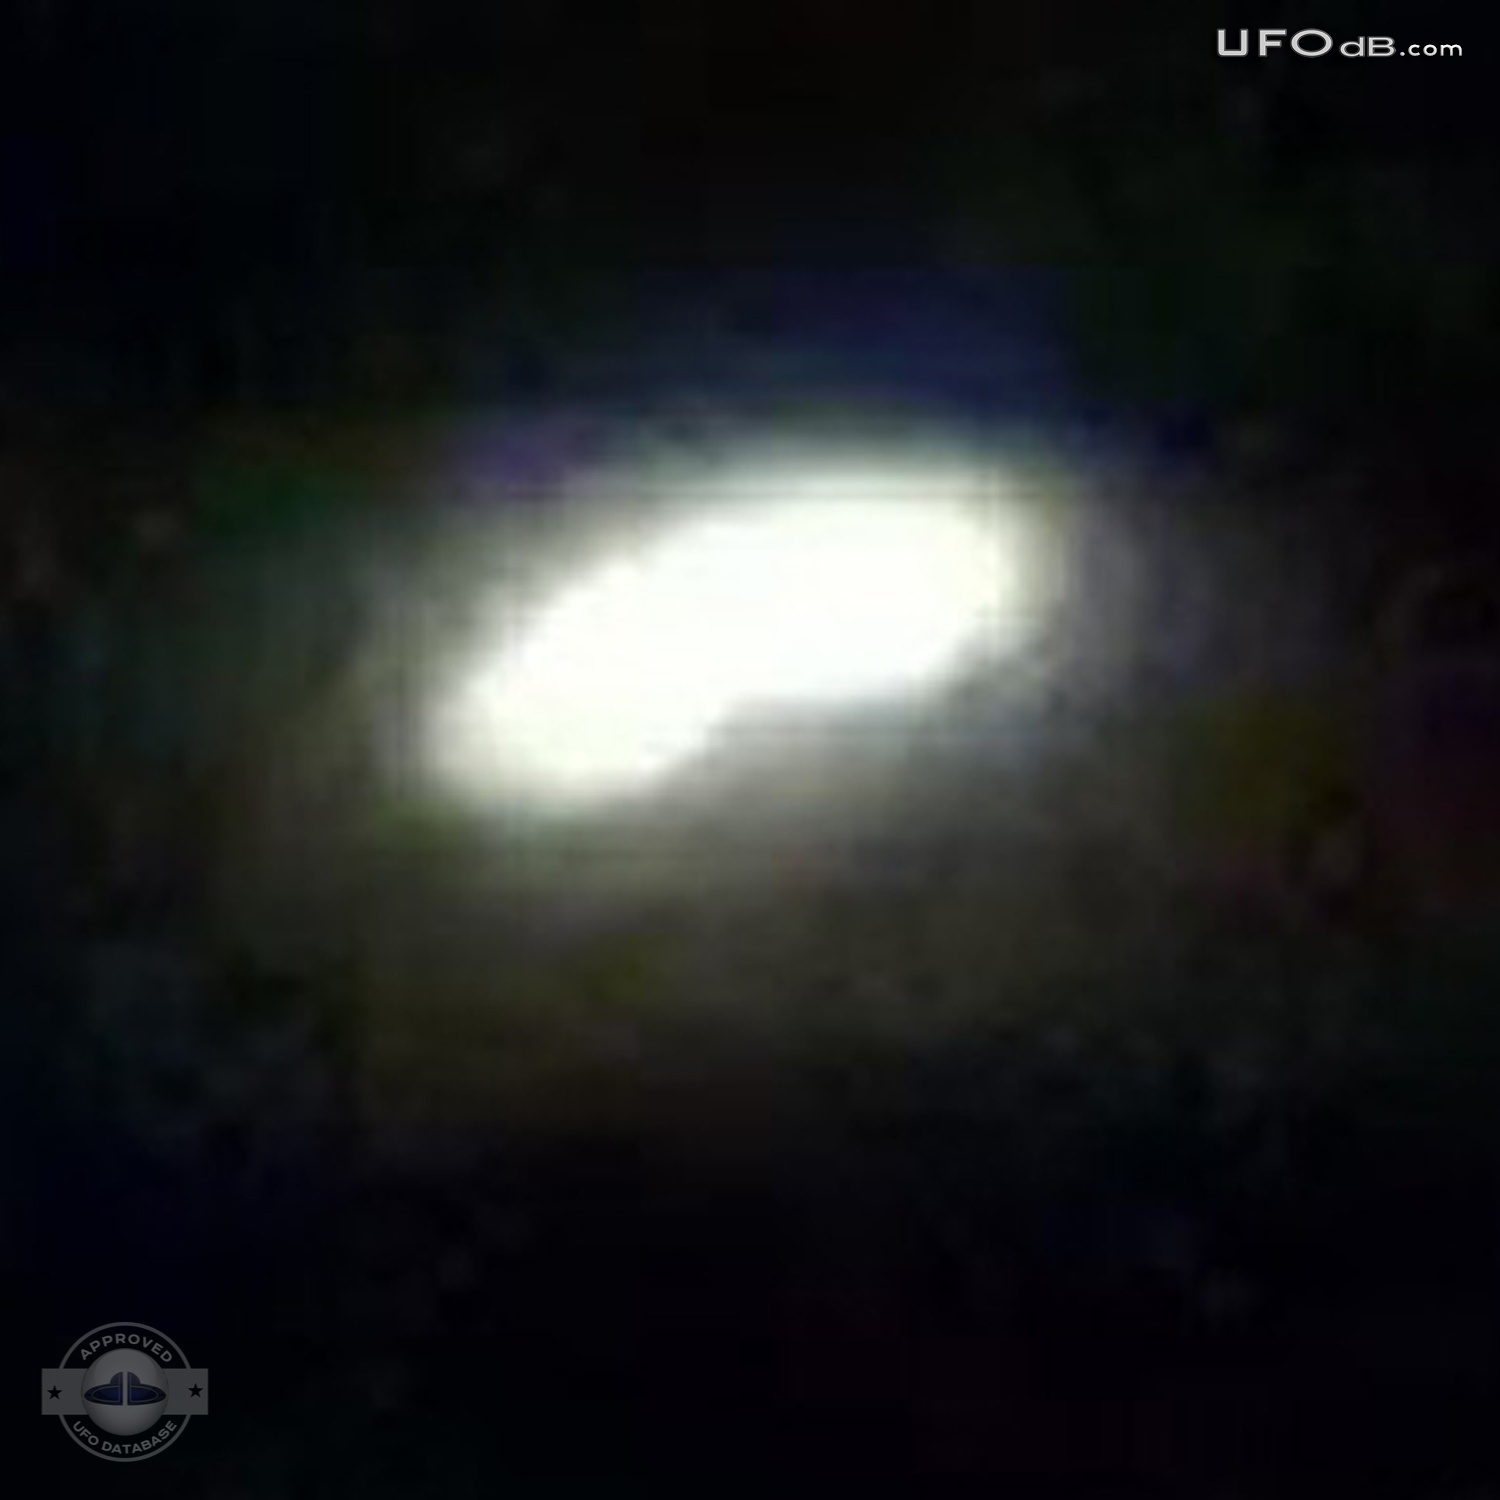 Two cars stops on the highway to look at a UFO - Argentina April 2011 UFO Picture #279-3